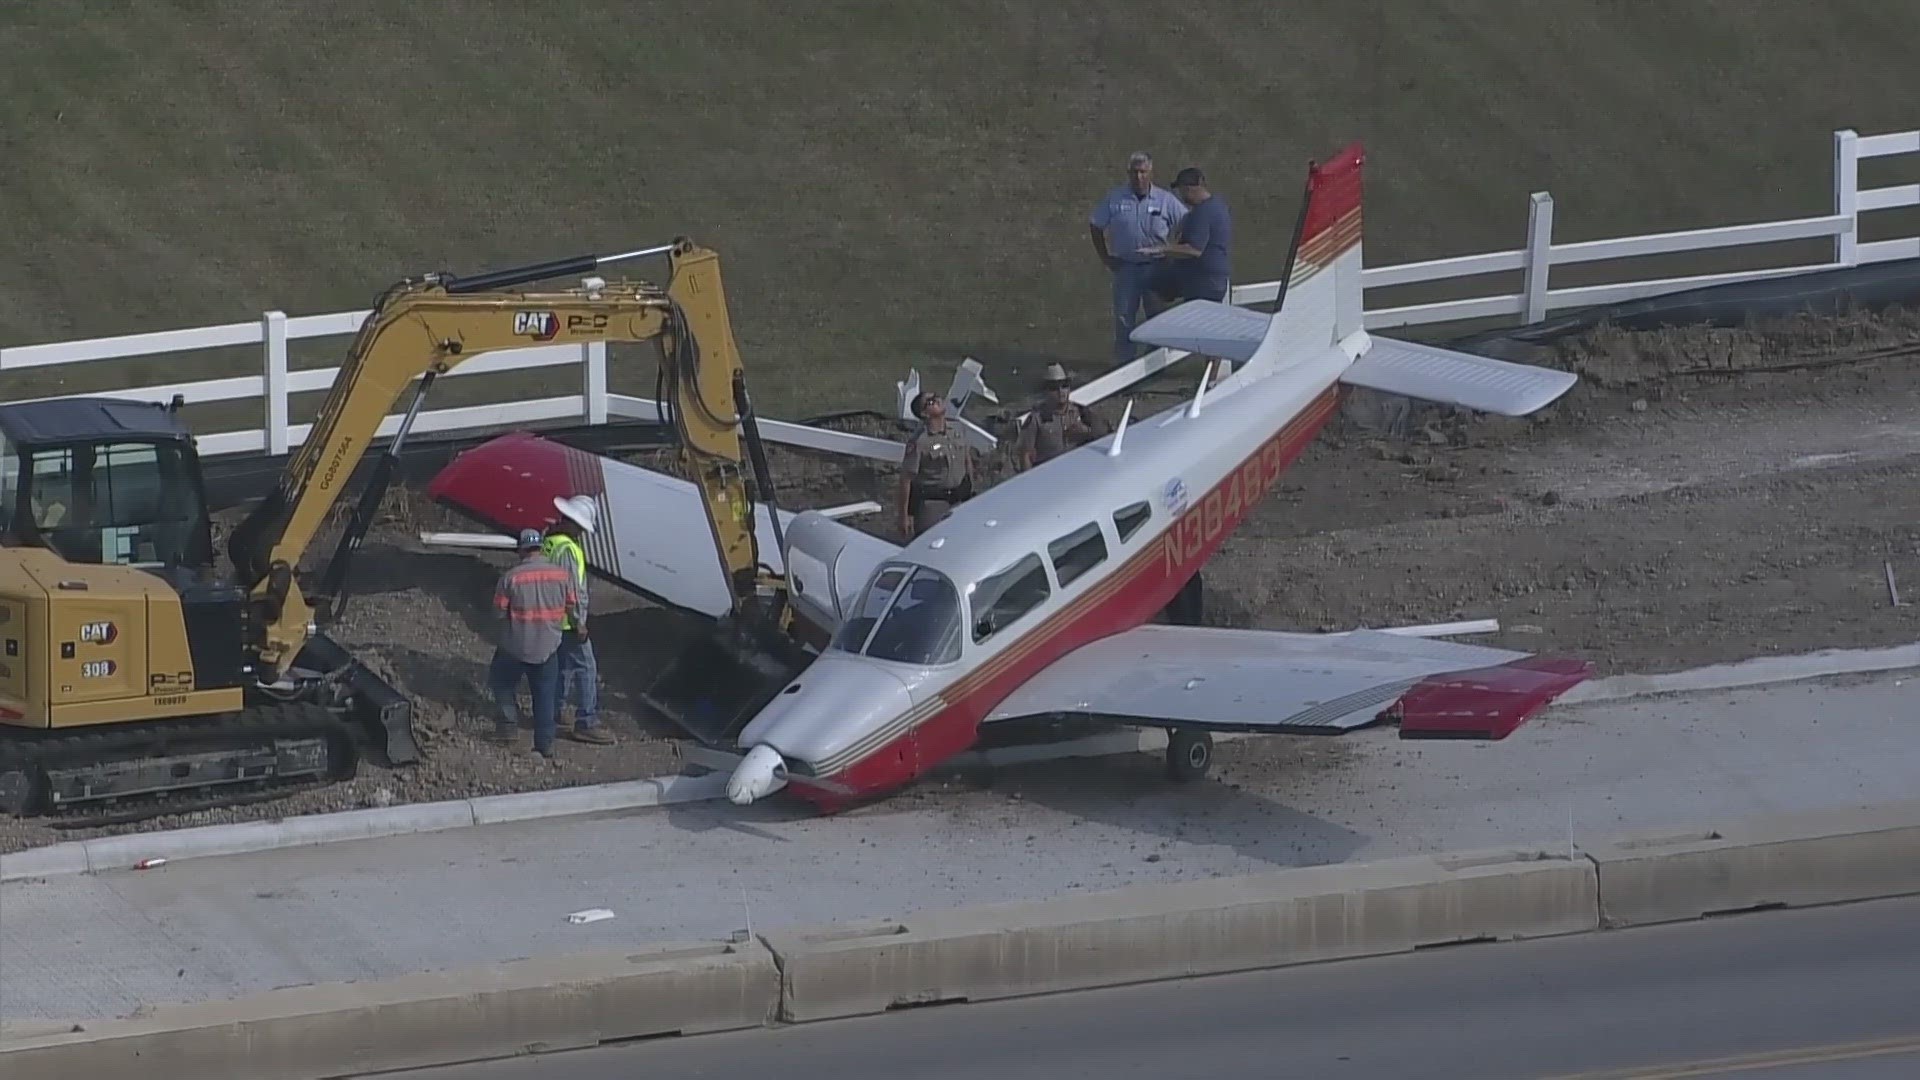 Police said the pilot was able to walk away from the aircraft without any injuries.